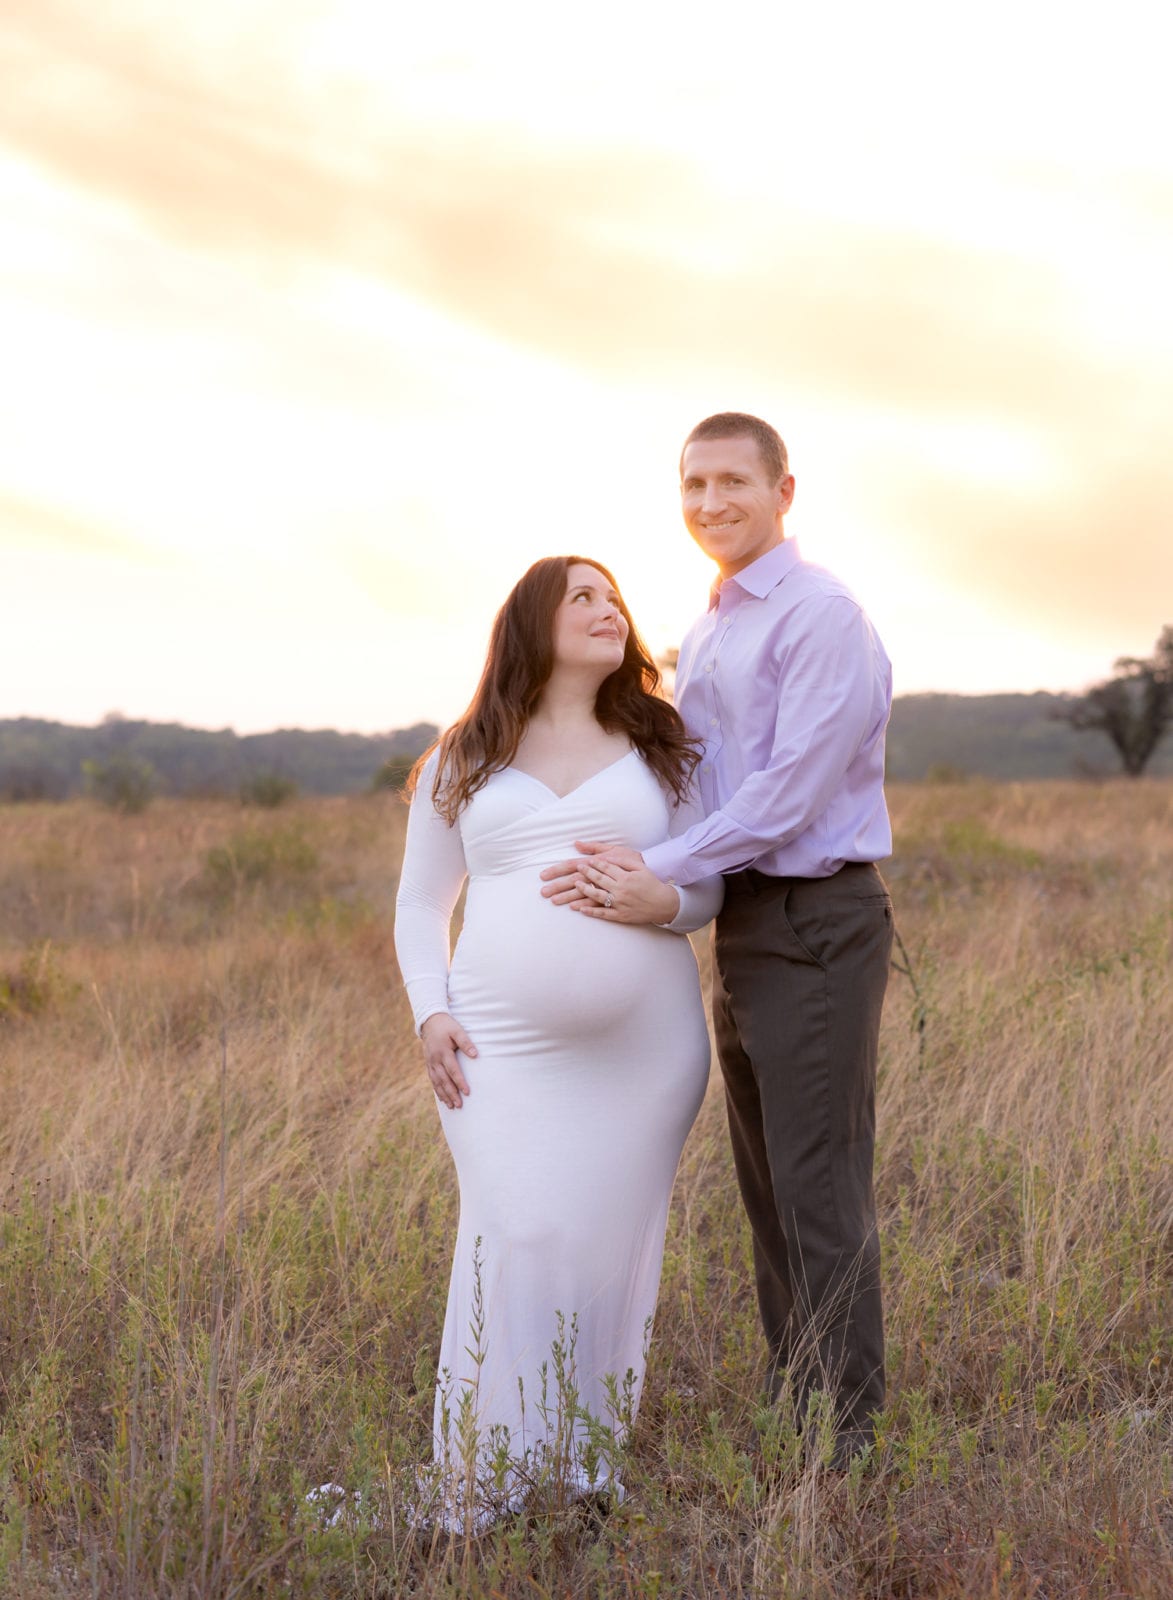 Maternity pics of a couple at sunset